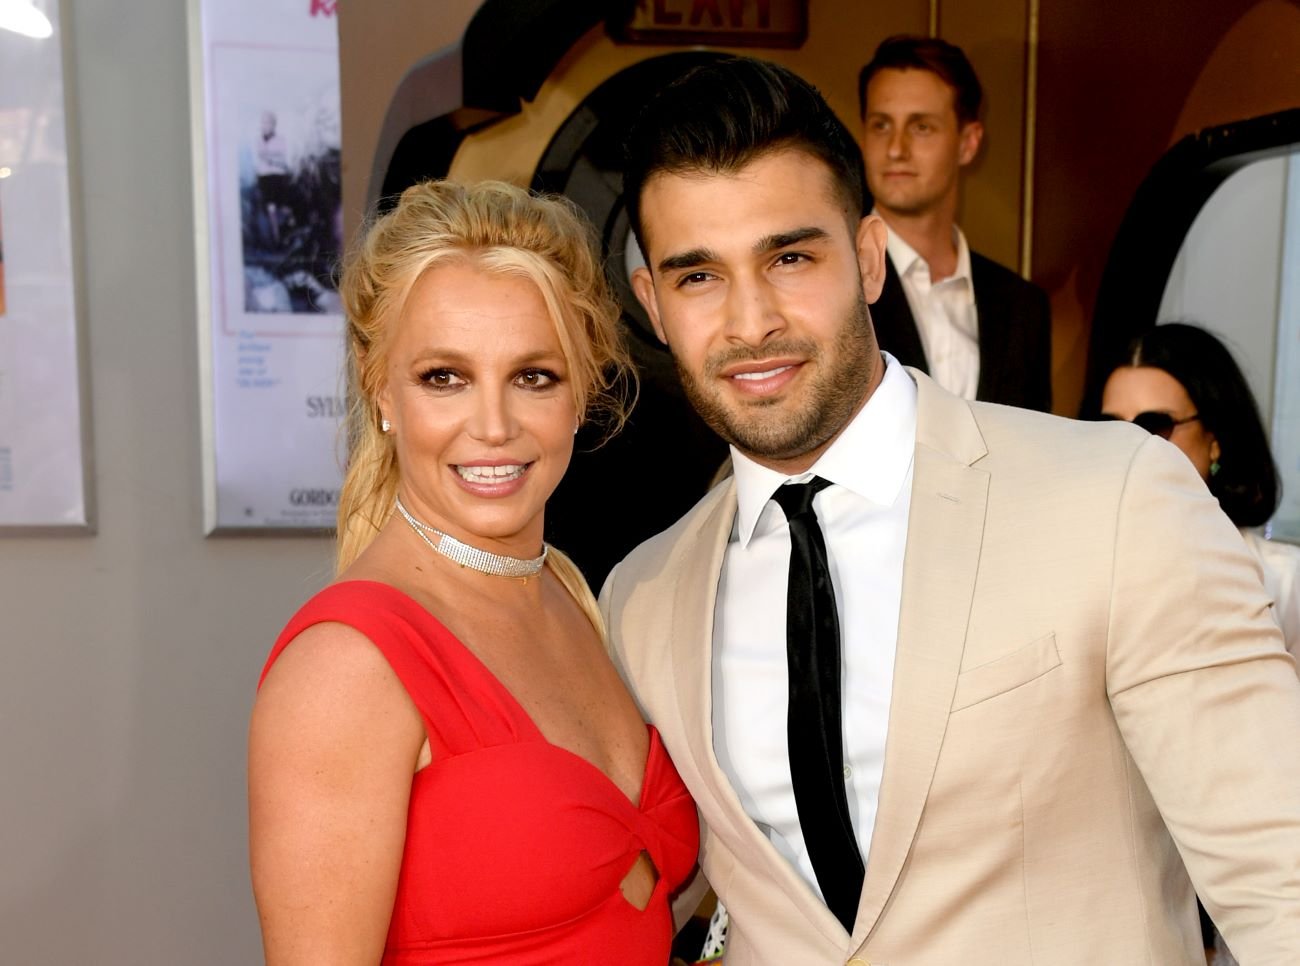 Britney Spears wears a red dress and stands next to Sam Asghari, who wears a tan suit.